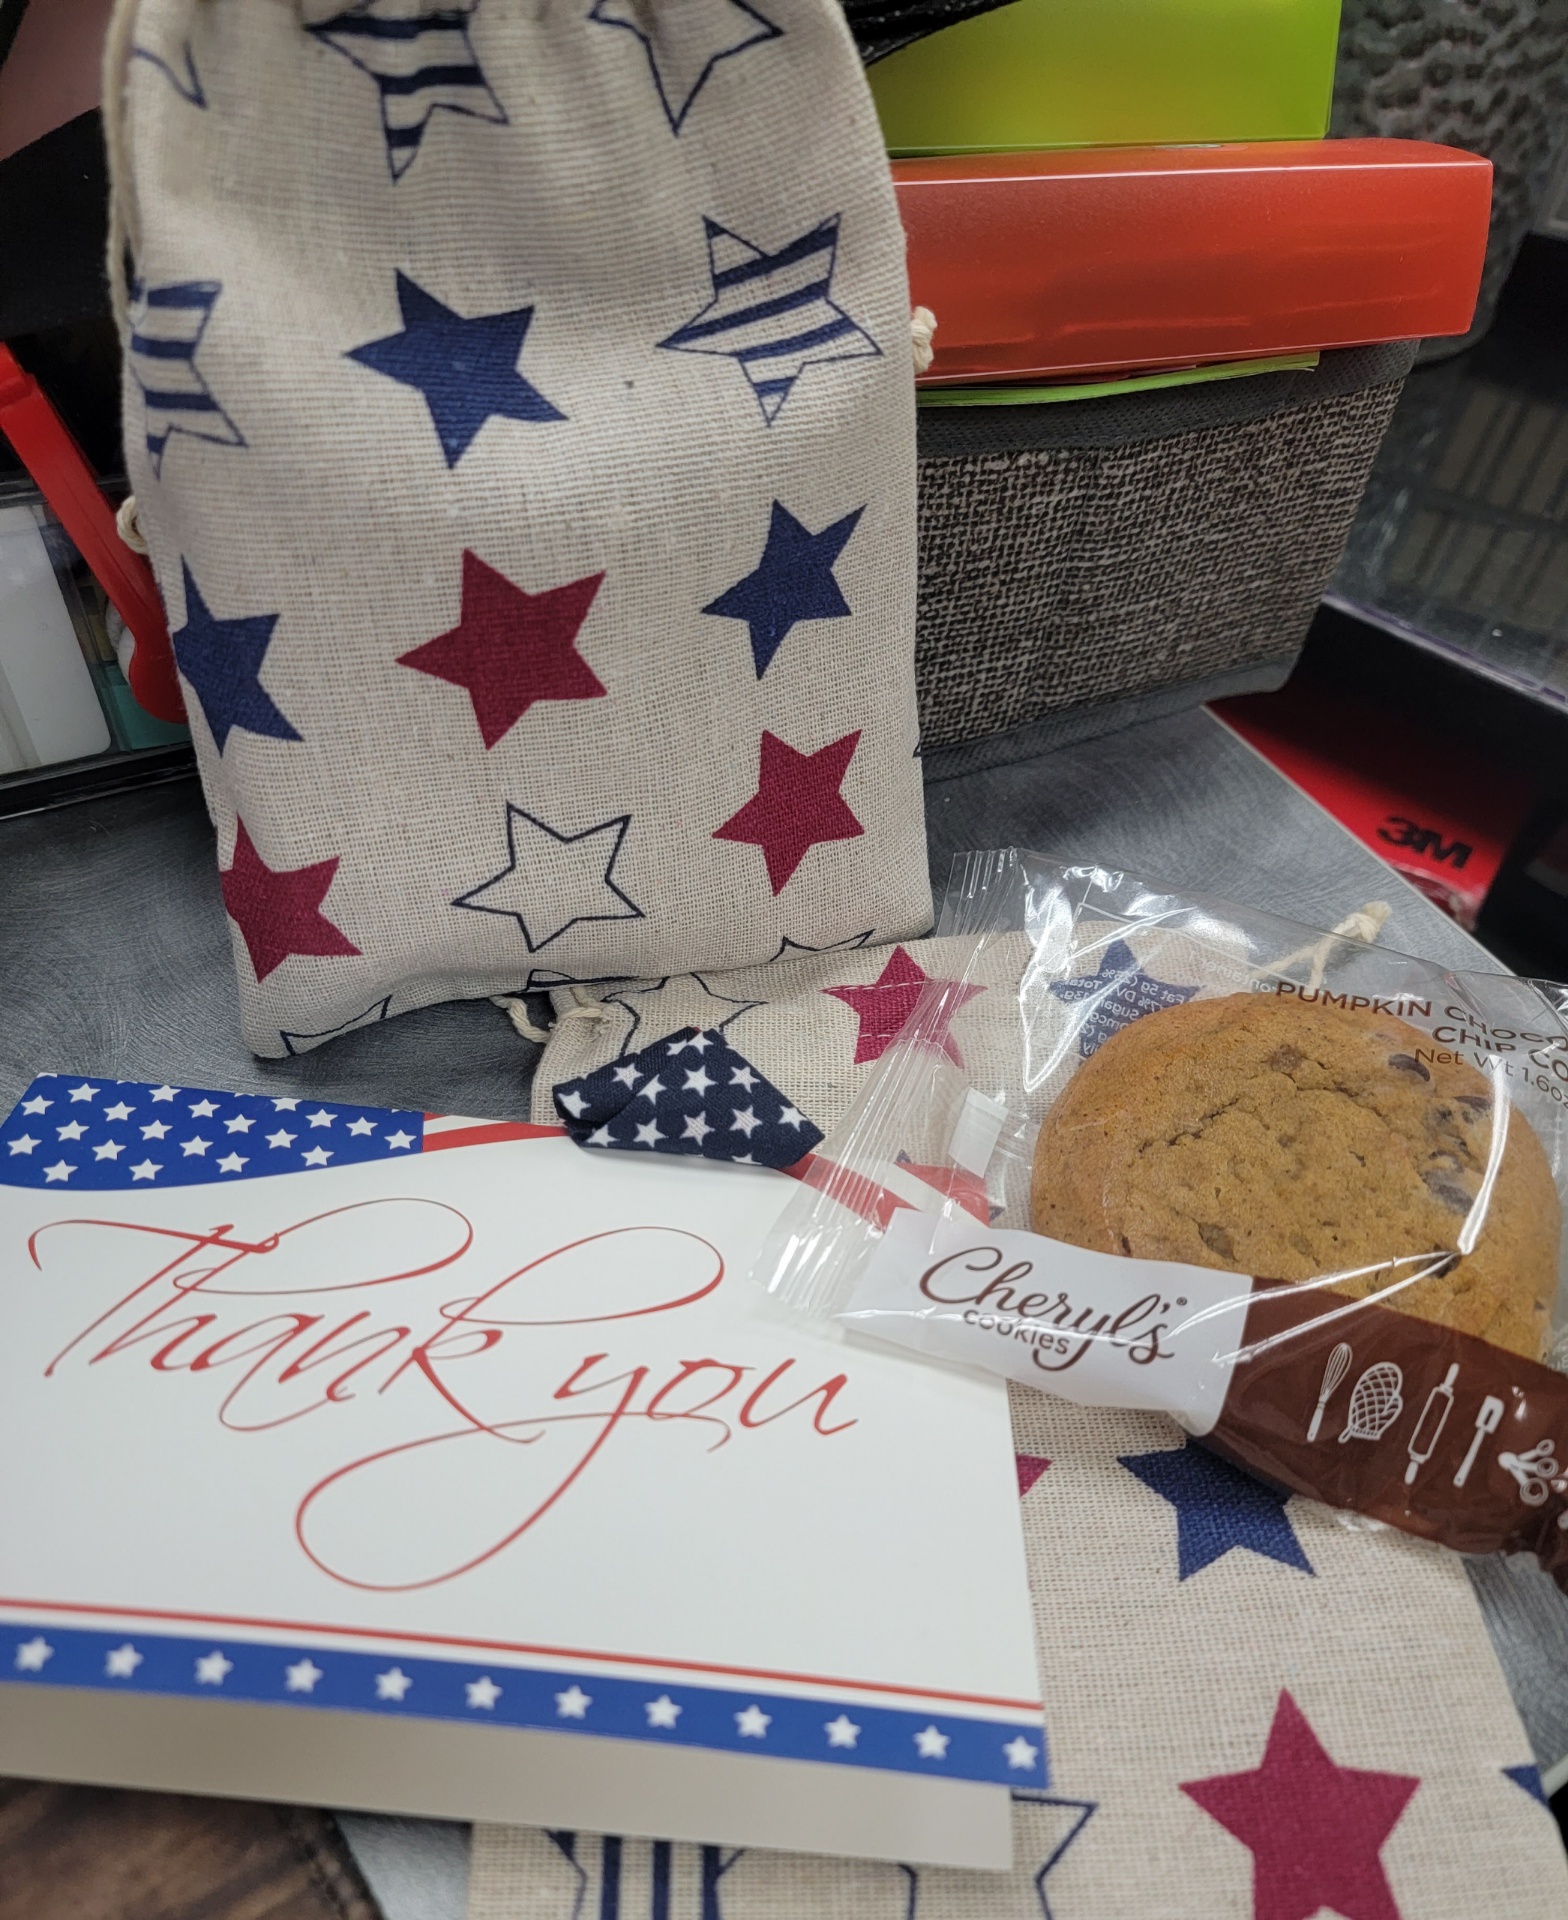 A thank you card and cookie that each veteran received